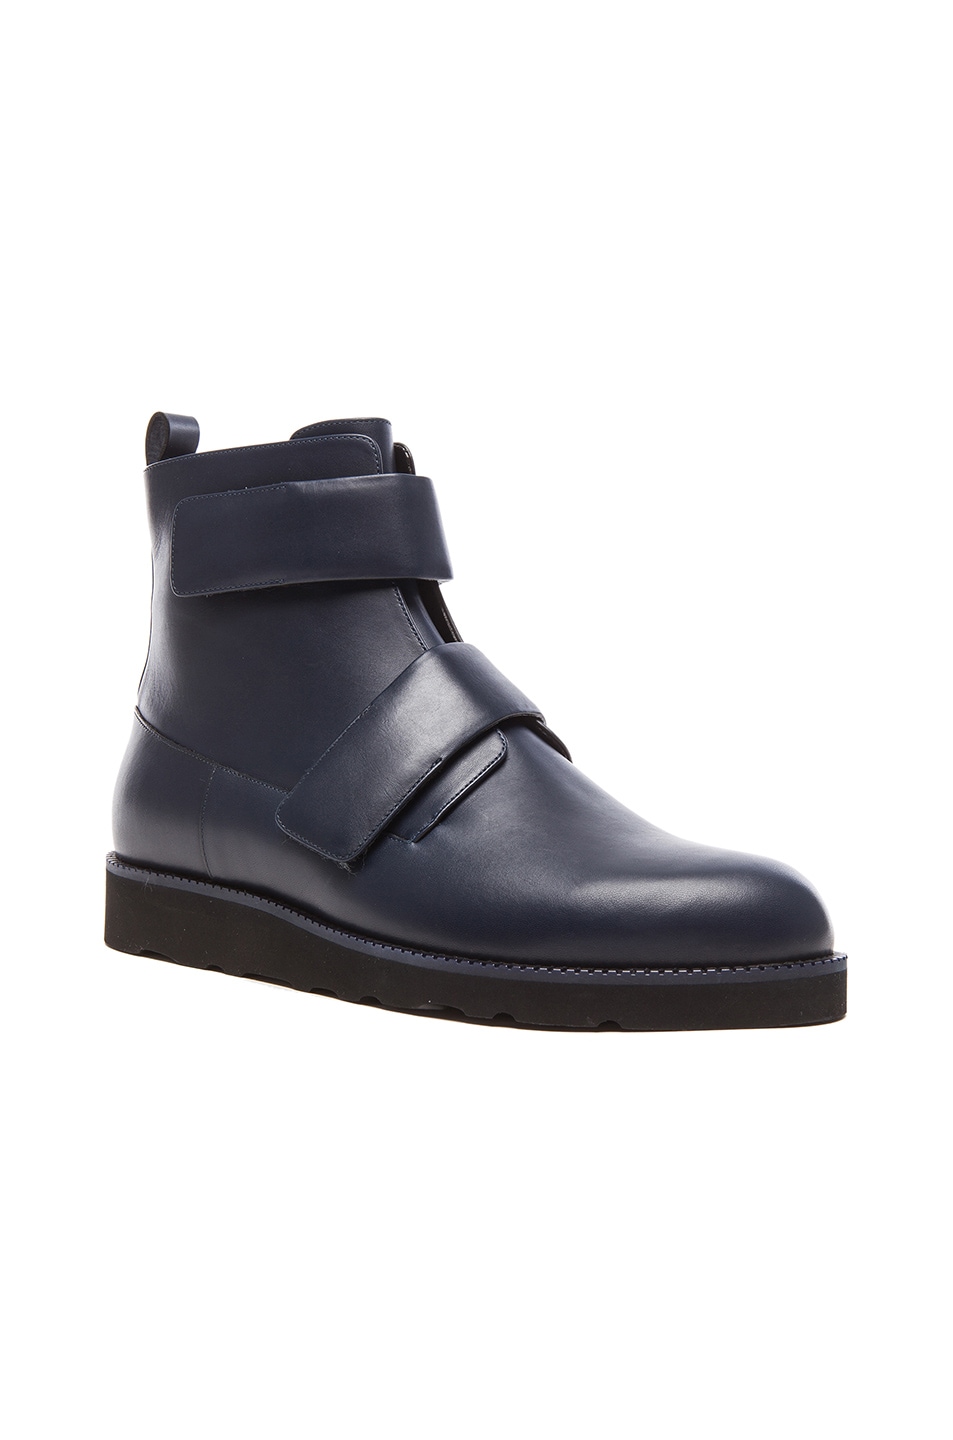 Image 1 of Christopher Kane Velcro Leather Boots in Black